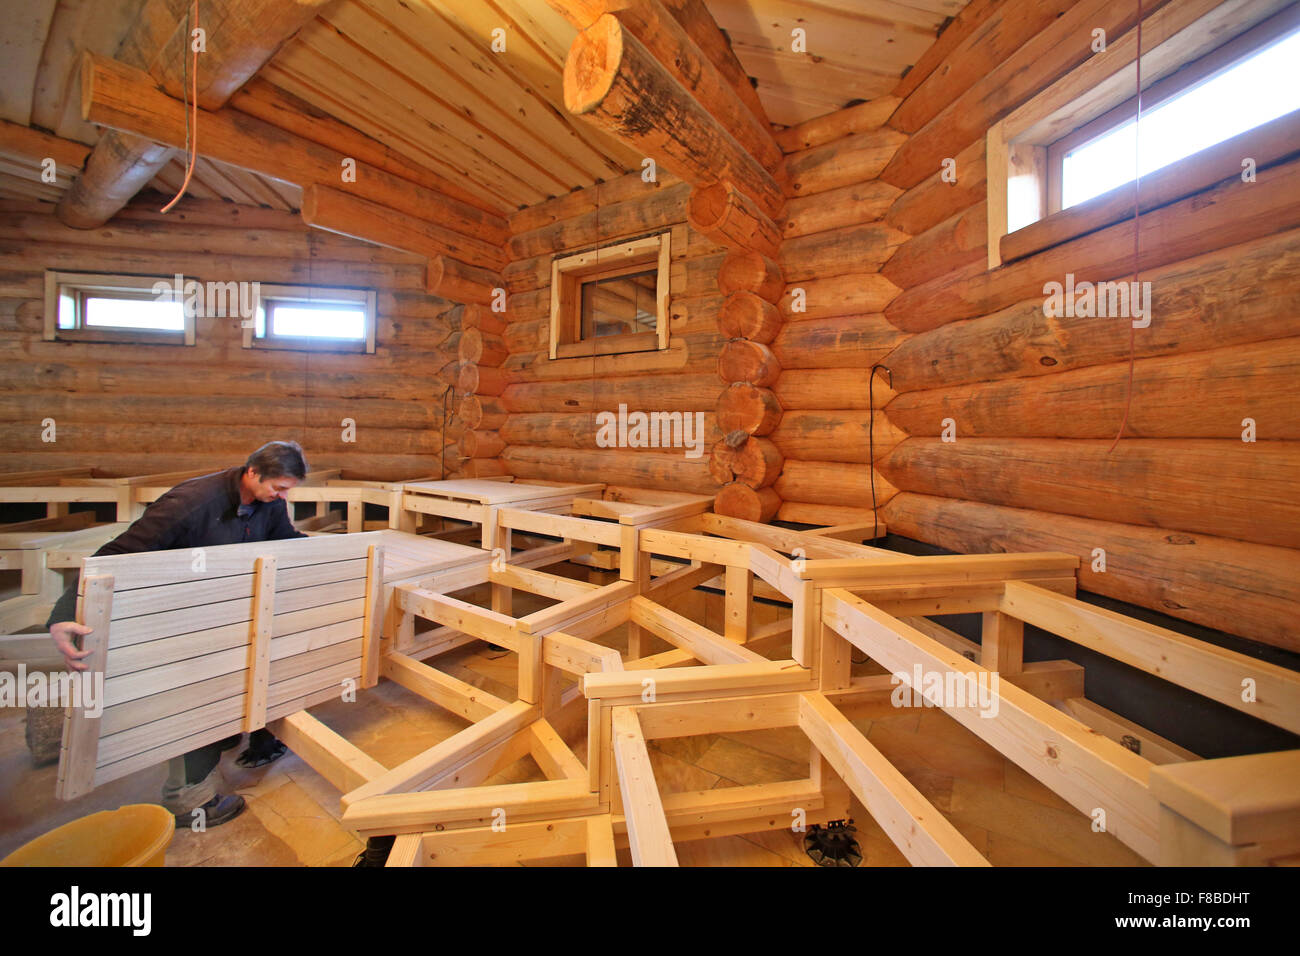 Carpenter Robby Weiss working on benches for a large new Russian sauna at the Badegaerten (lit. bathing gardens) in Eibenstock, Germany, 3 December 2015. On New Year's Eve, between 80 and 120 guests are due to attend the first sauna here. A total of 500 beams of Siberian larch were used in the construction of the 20-metre-high event sauna. The sauna along with its outdoor area are due to be completed in April 2016, at a cost of one million euros. PHOTO: JAN WOITAS Stock Photo